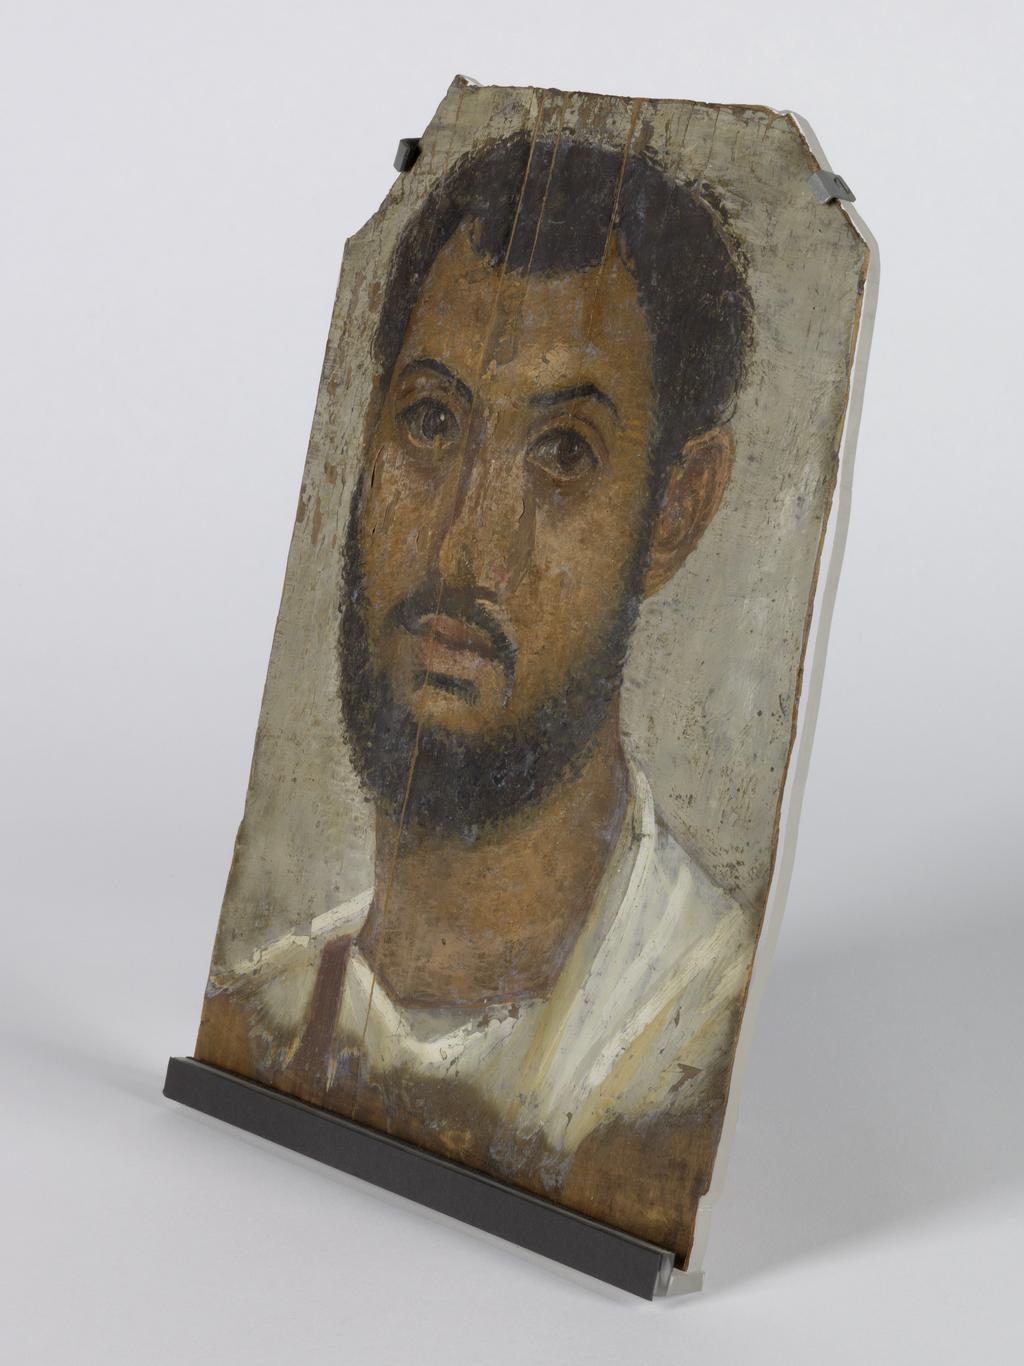 An image of Mummy trappings. Mummy portrait of bearded man. Production Place: Egypt. Find Spot: Negatine-Ella, Egypt or Hawara. Wood, painted, height 32.5 cm, width 22.5 cm, 100-150. Middle Roman.